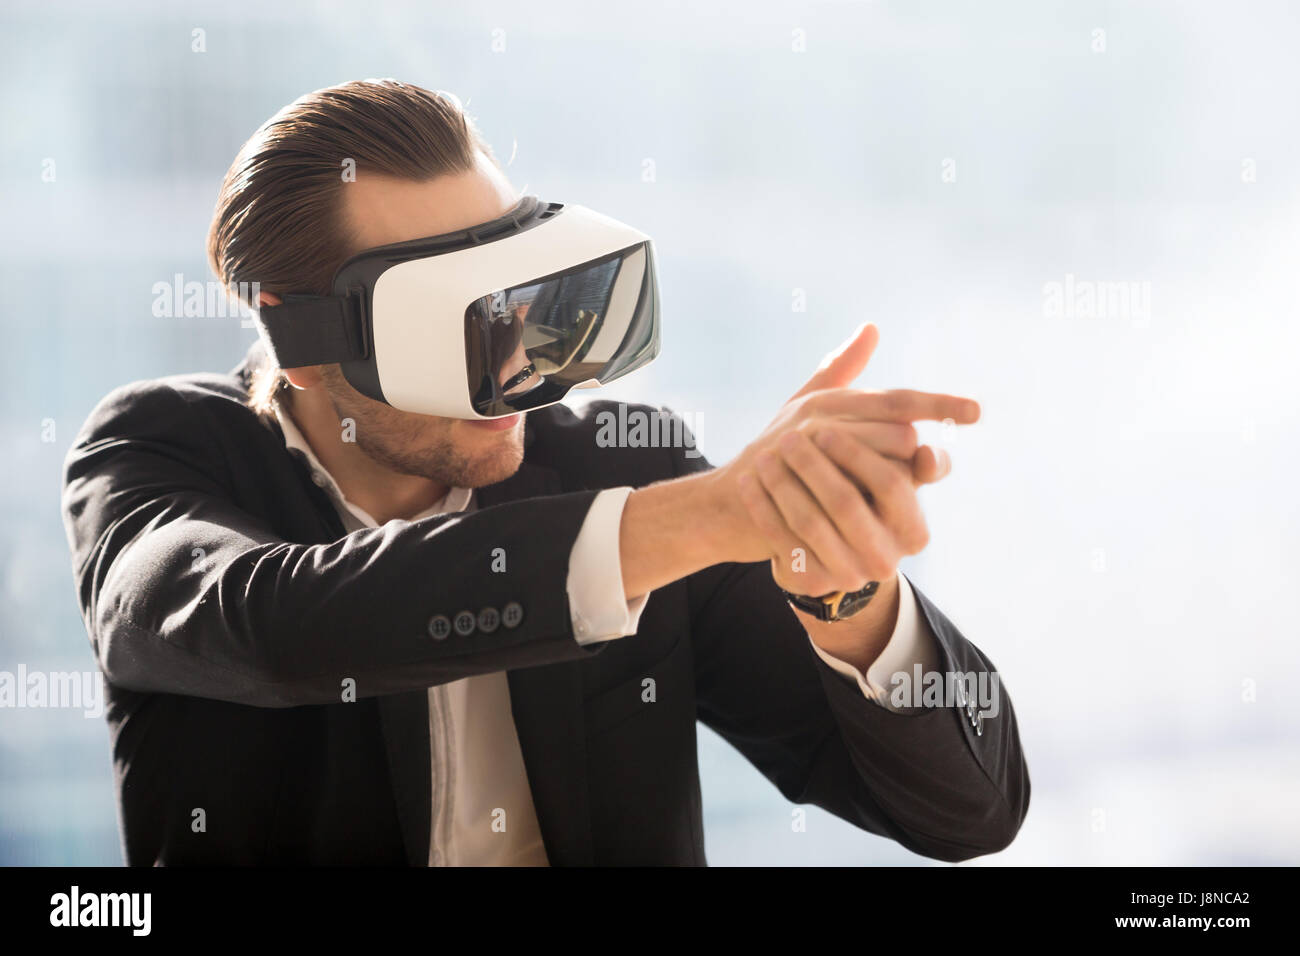 Man playing in shooter game with VR headset Stock Photo